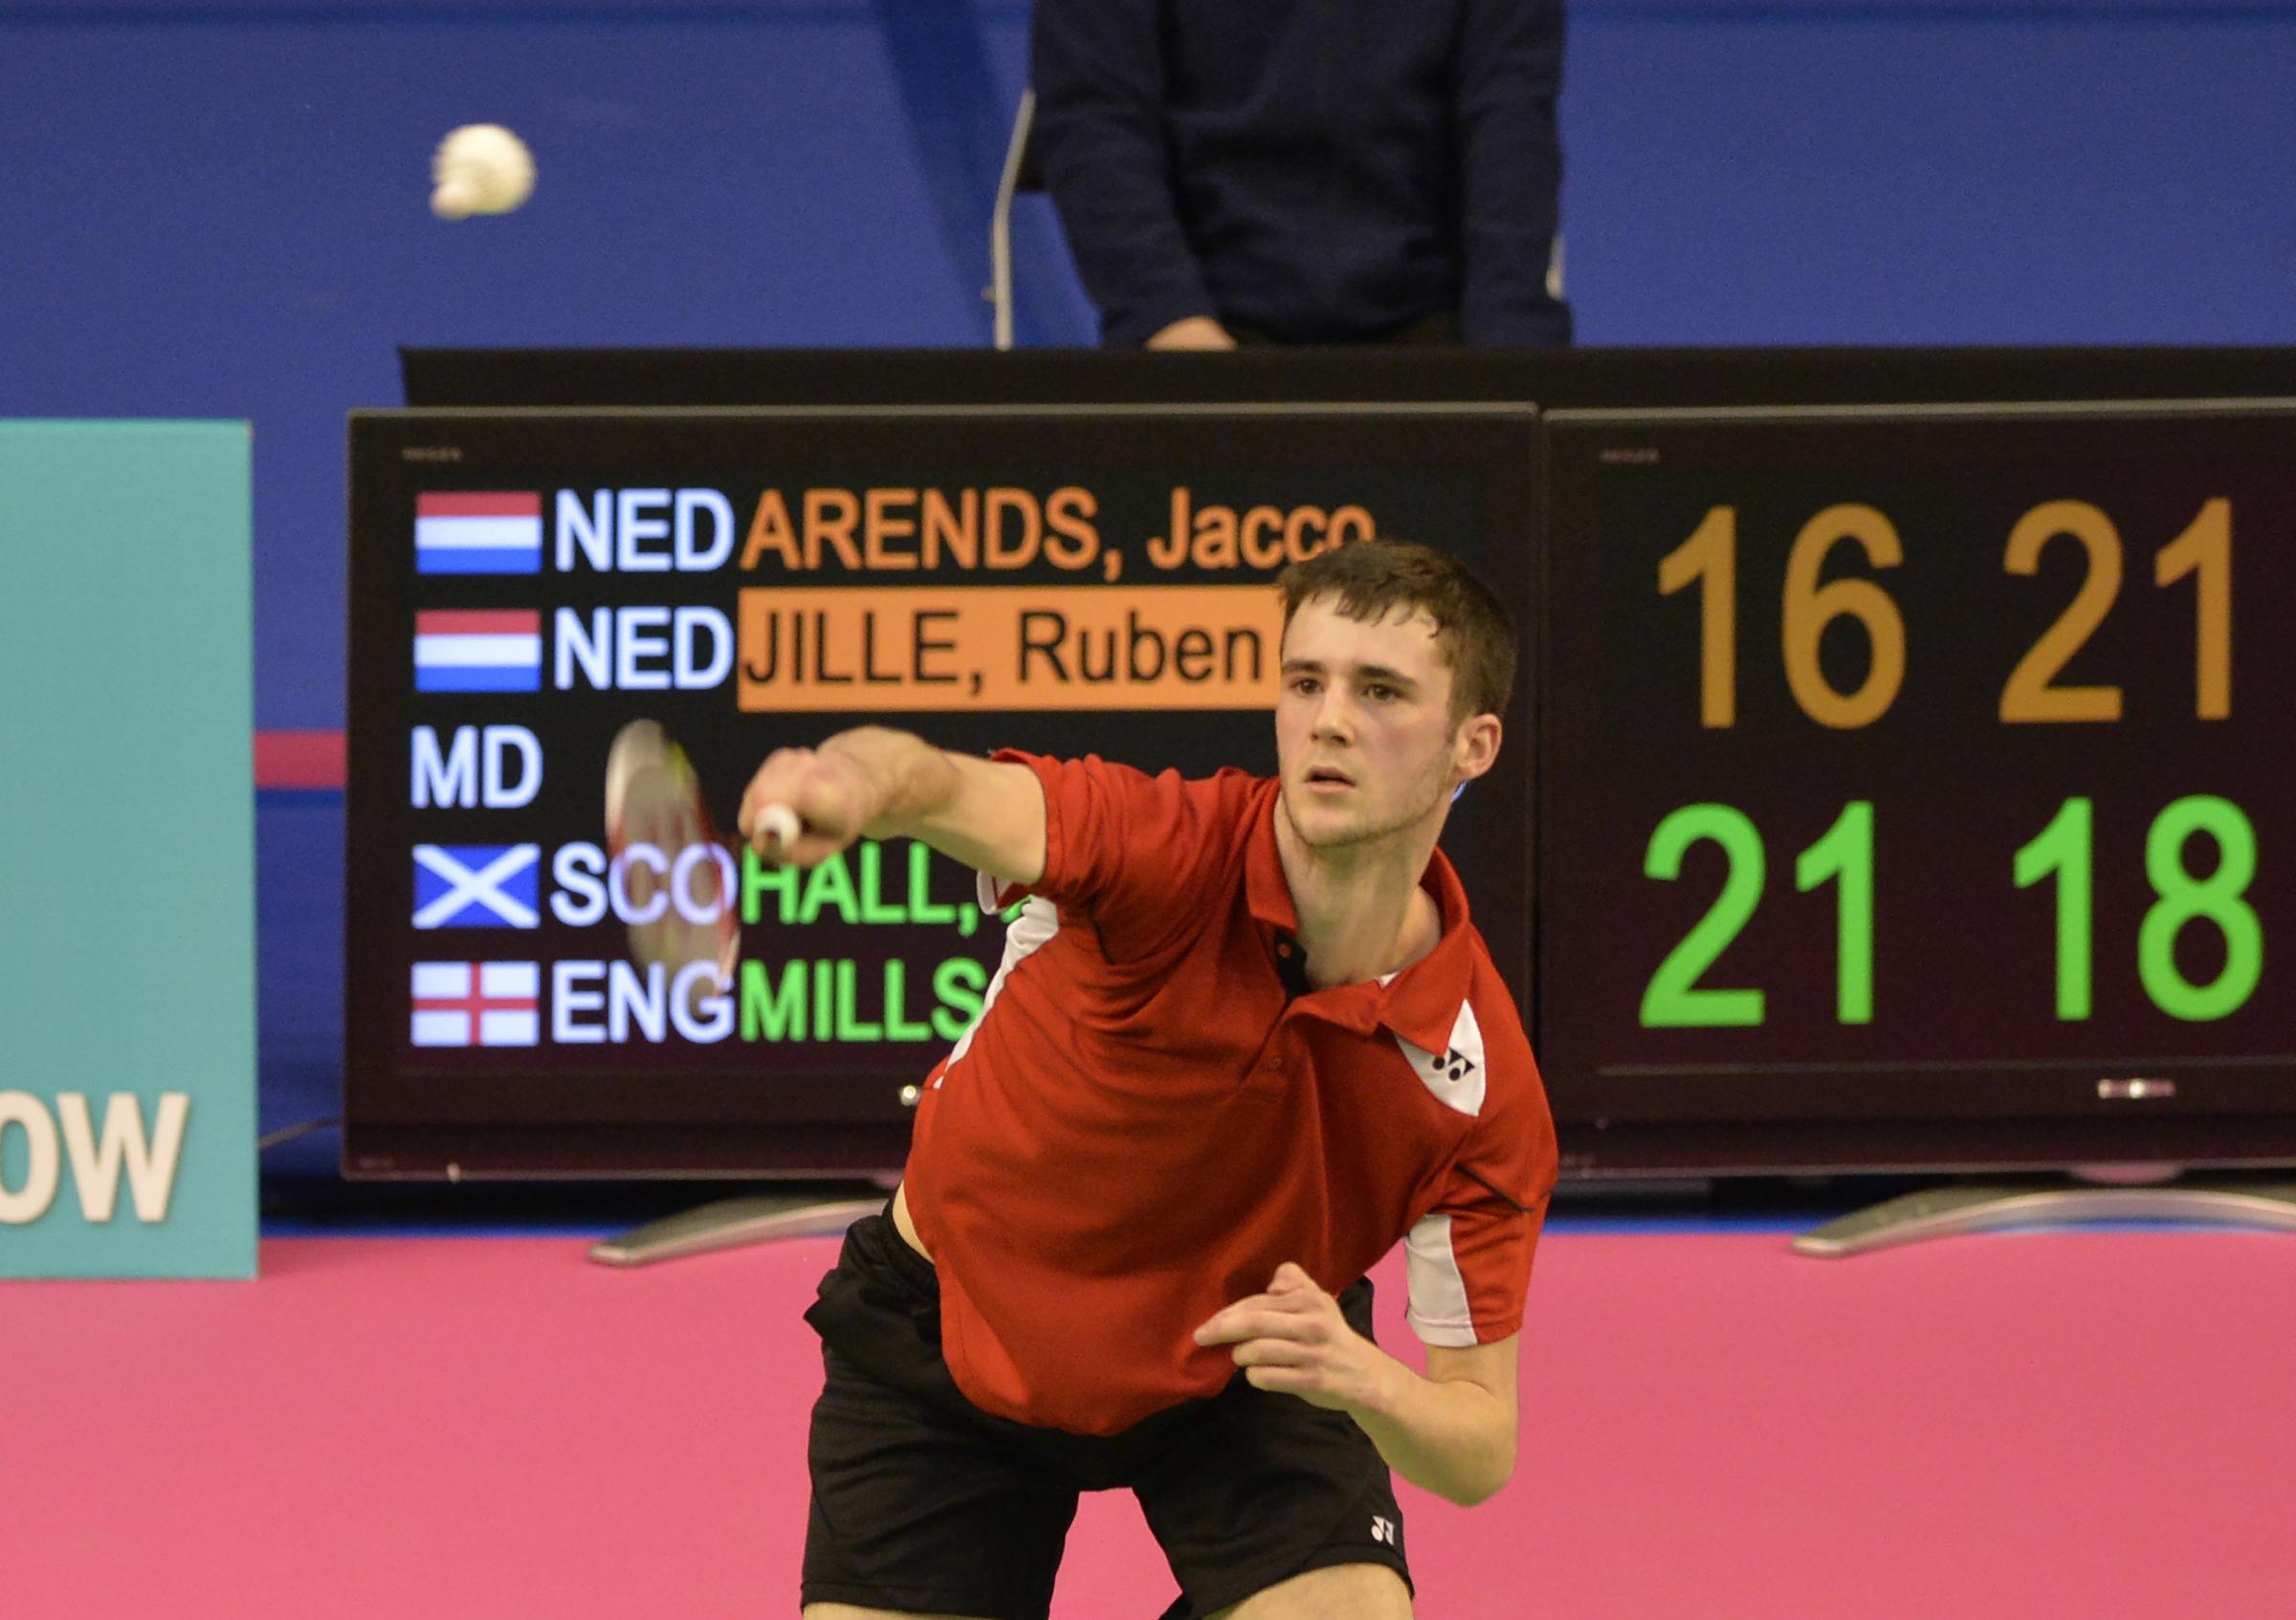 Hall just misses out in home event at Scottish badminton Grand Prix but pleased with new partnership - Herald Scotland